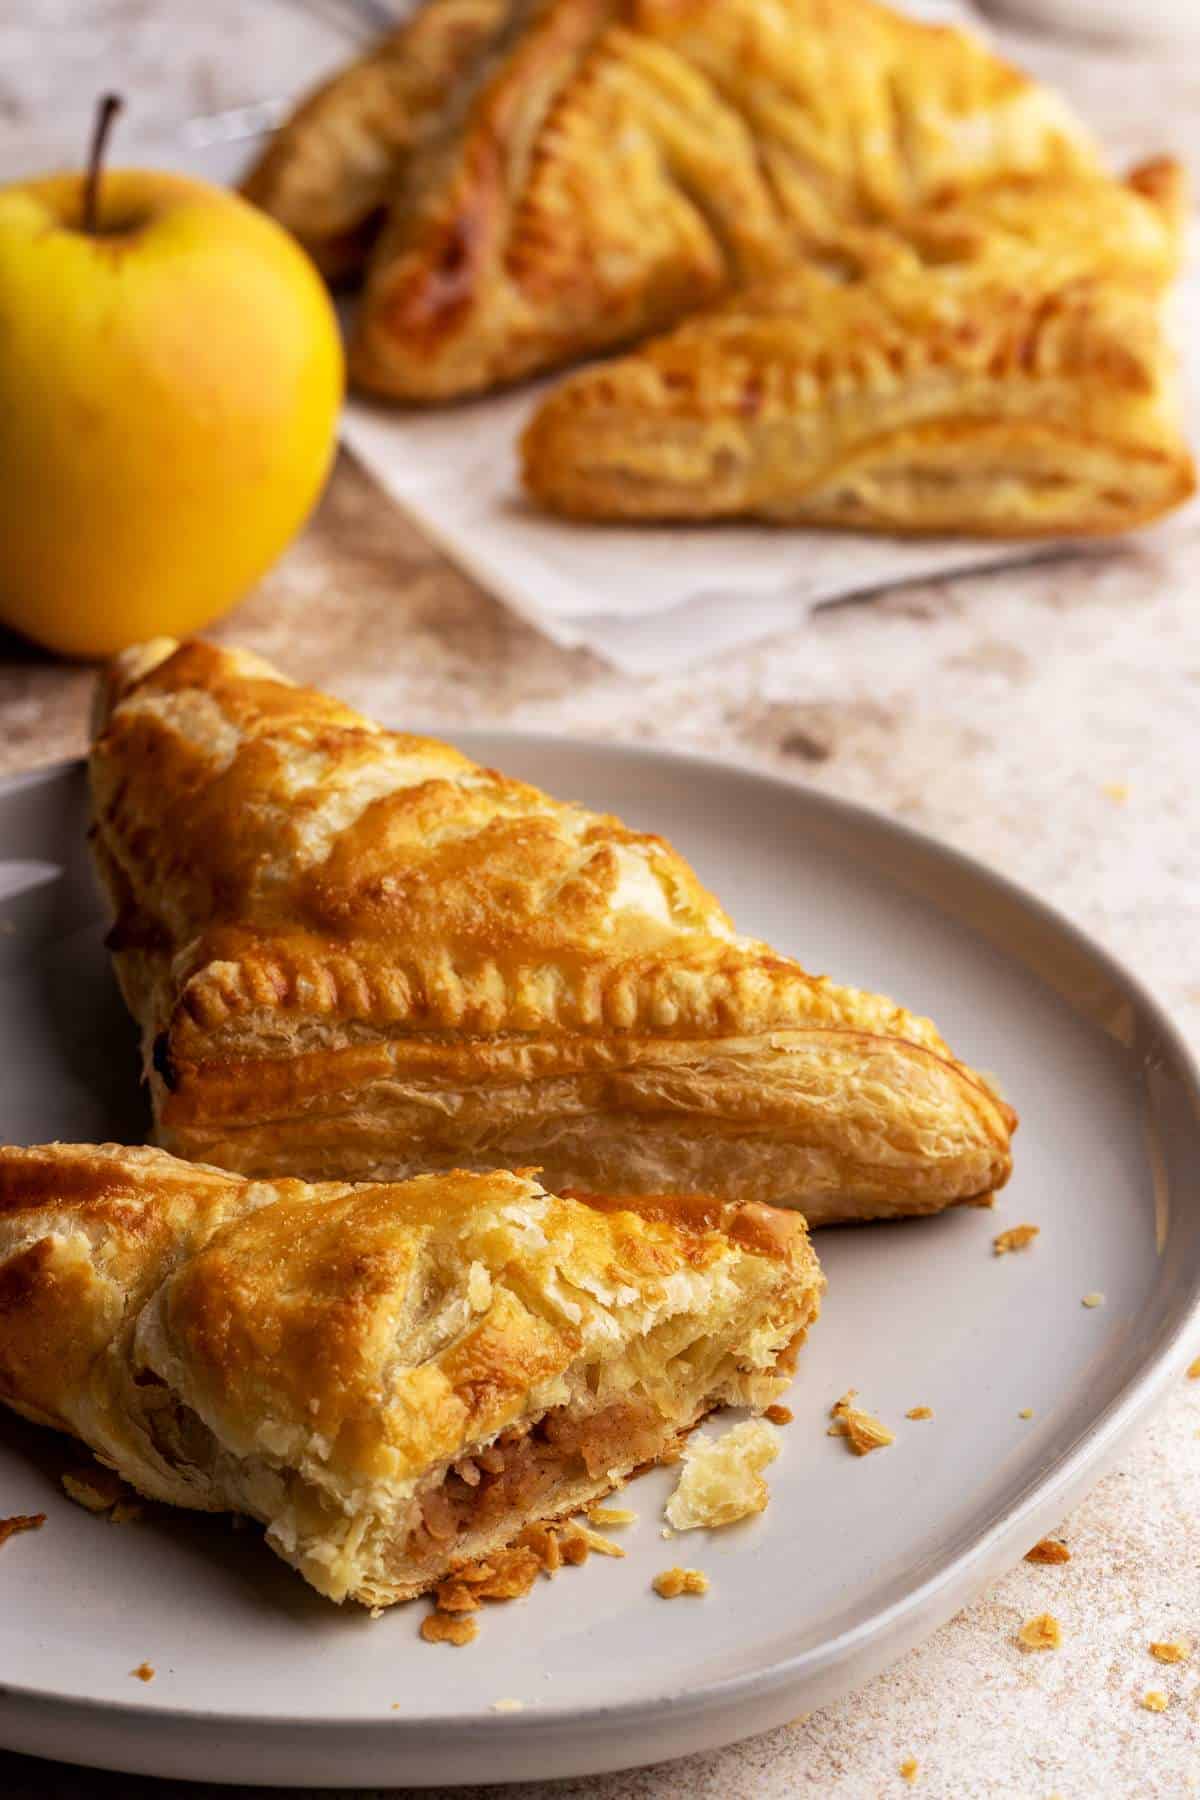 Apple turnovers on a plate.